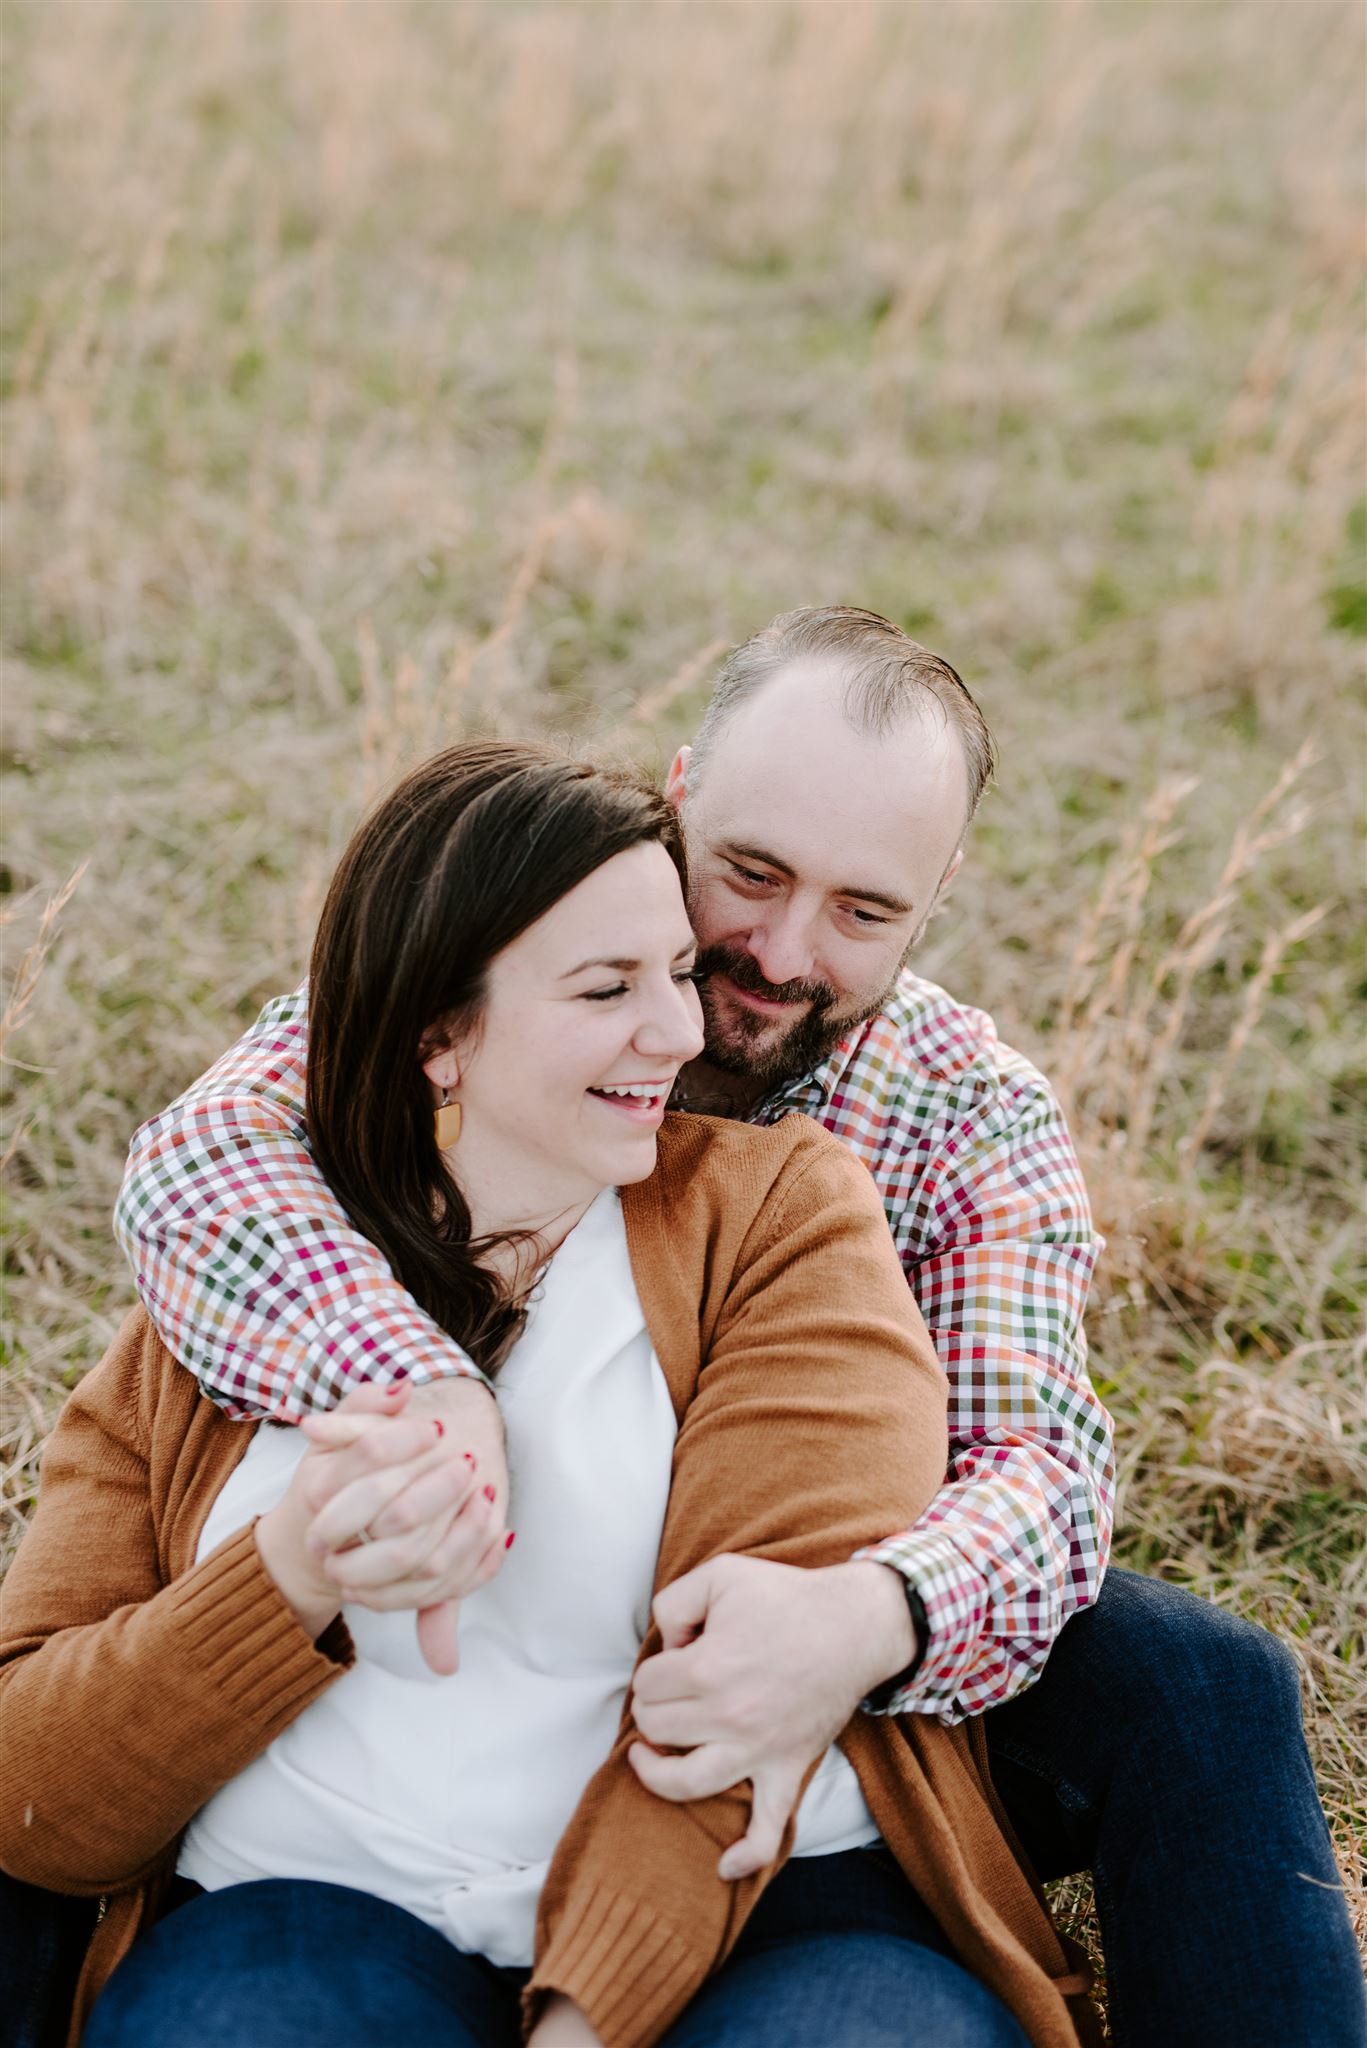 Laid Back Engagement Session from Sara Bill Photography featured on Nashville Bride Guide